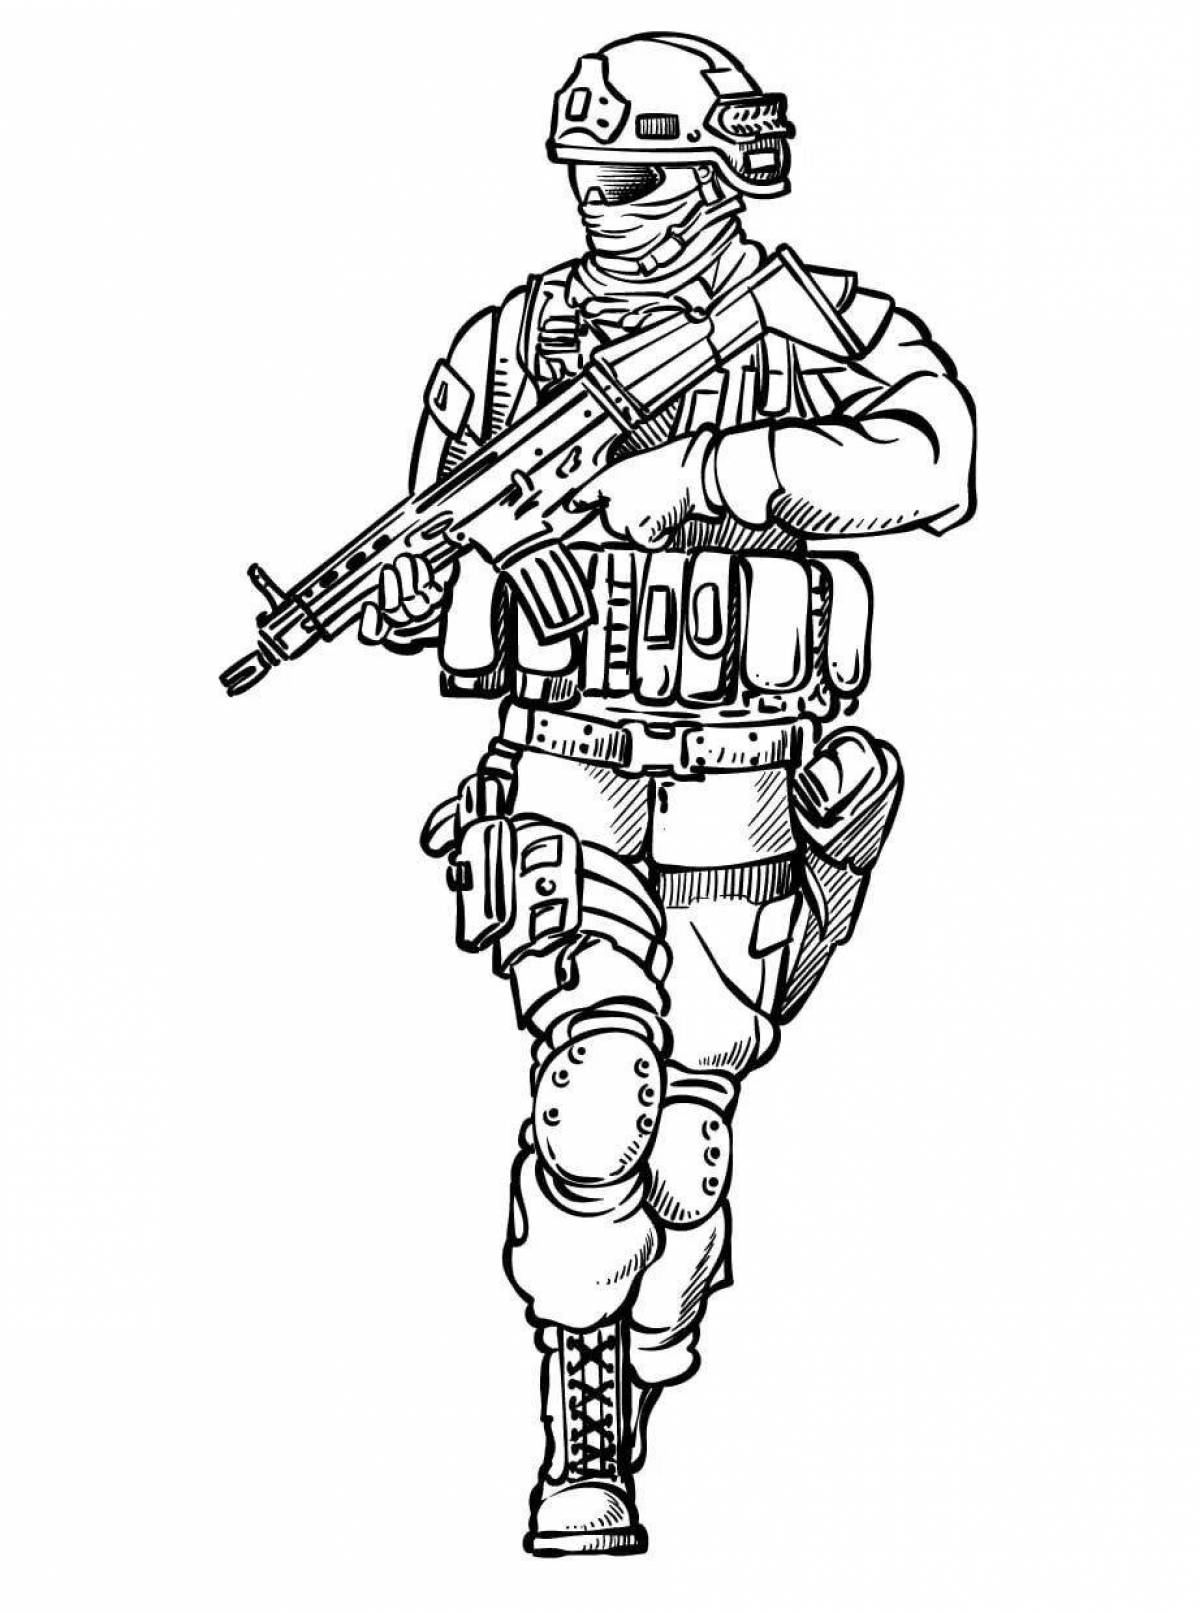 Colourful military uniform coloring book